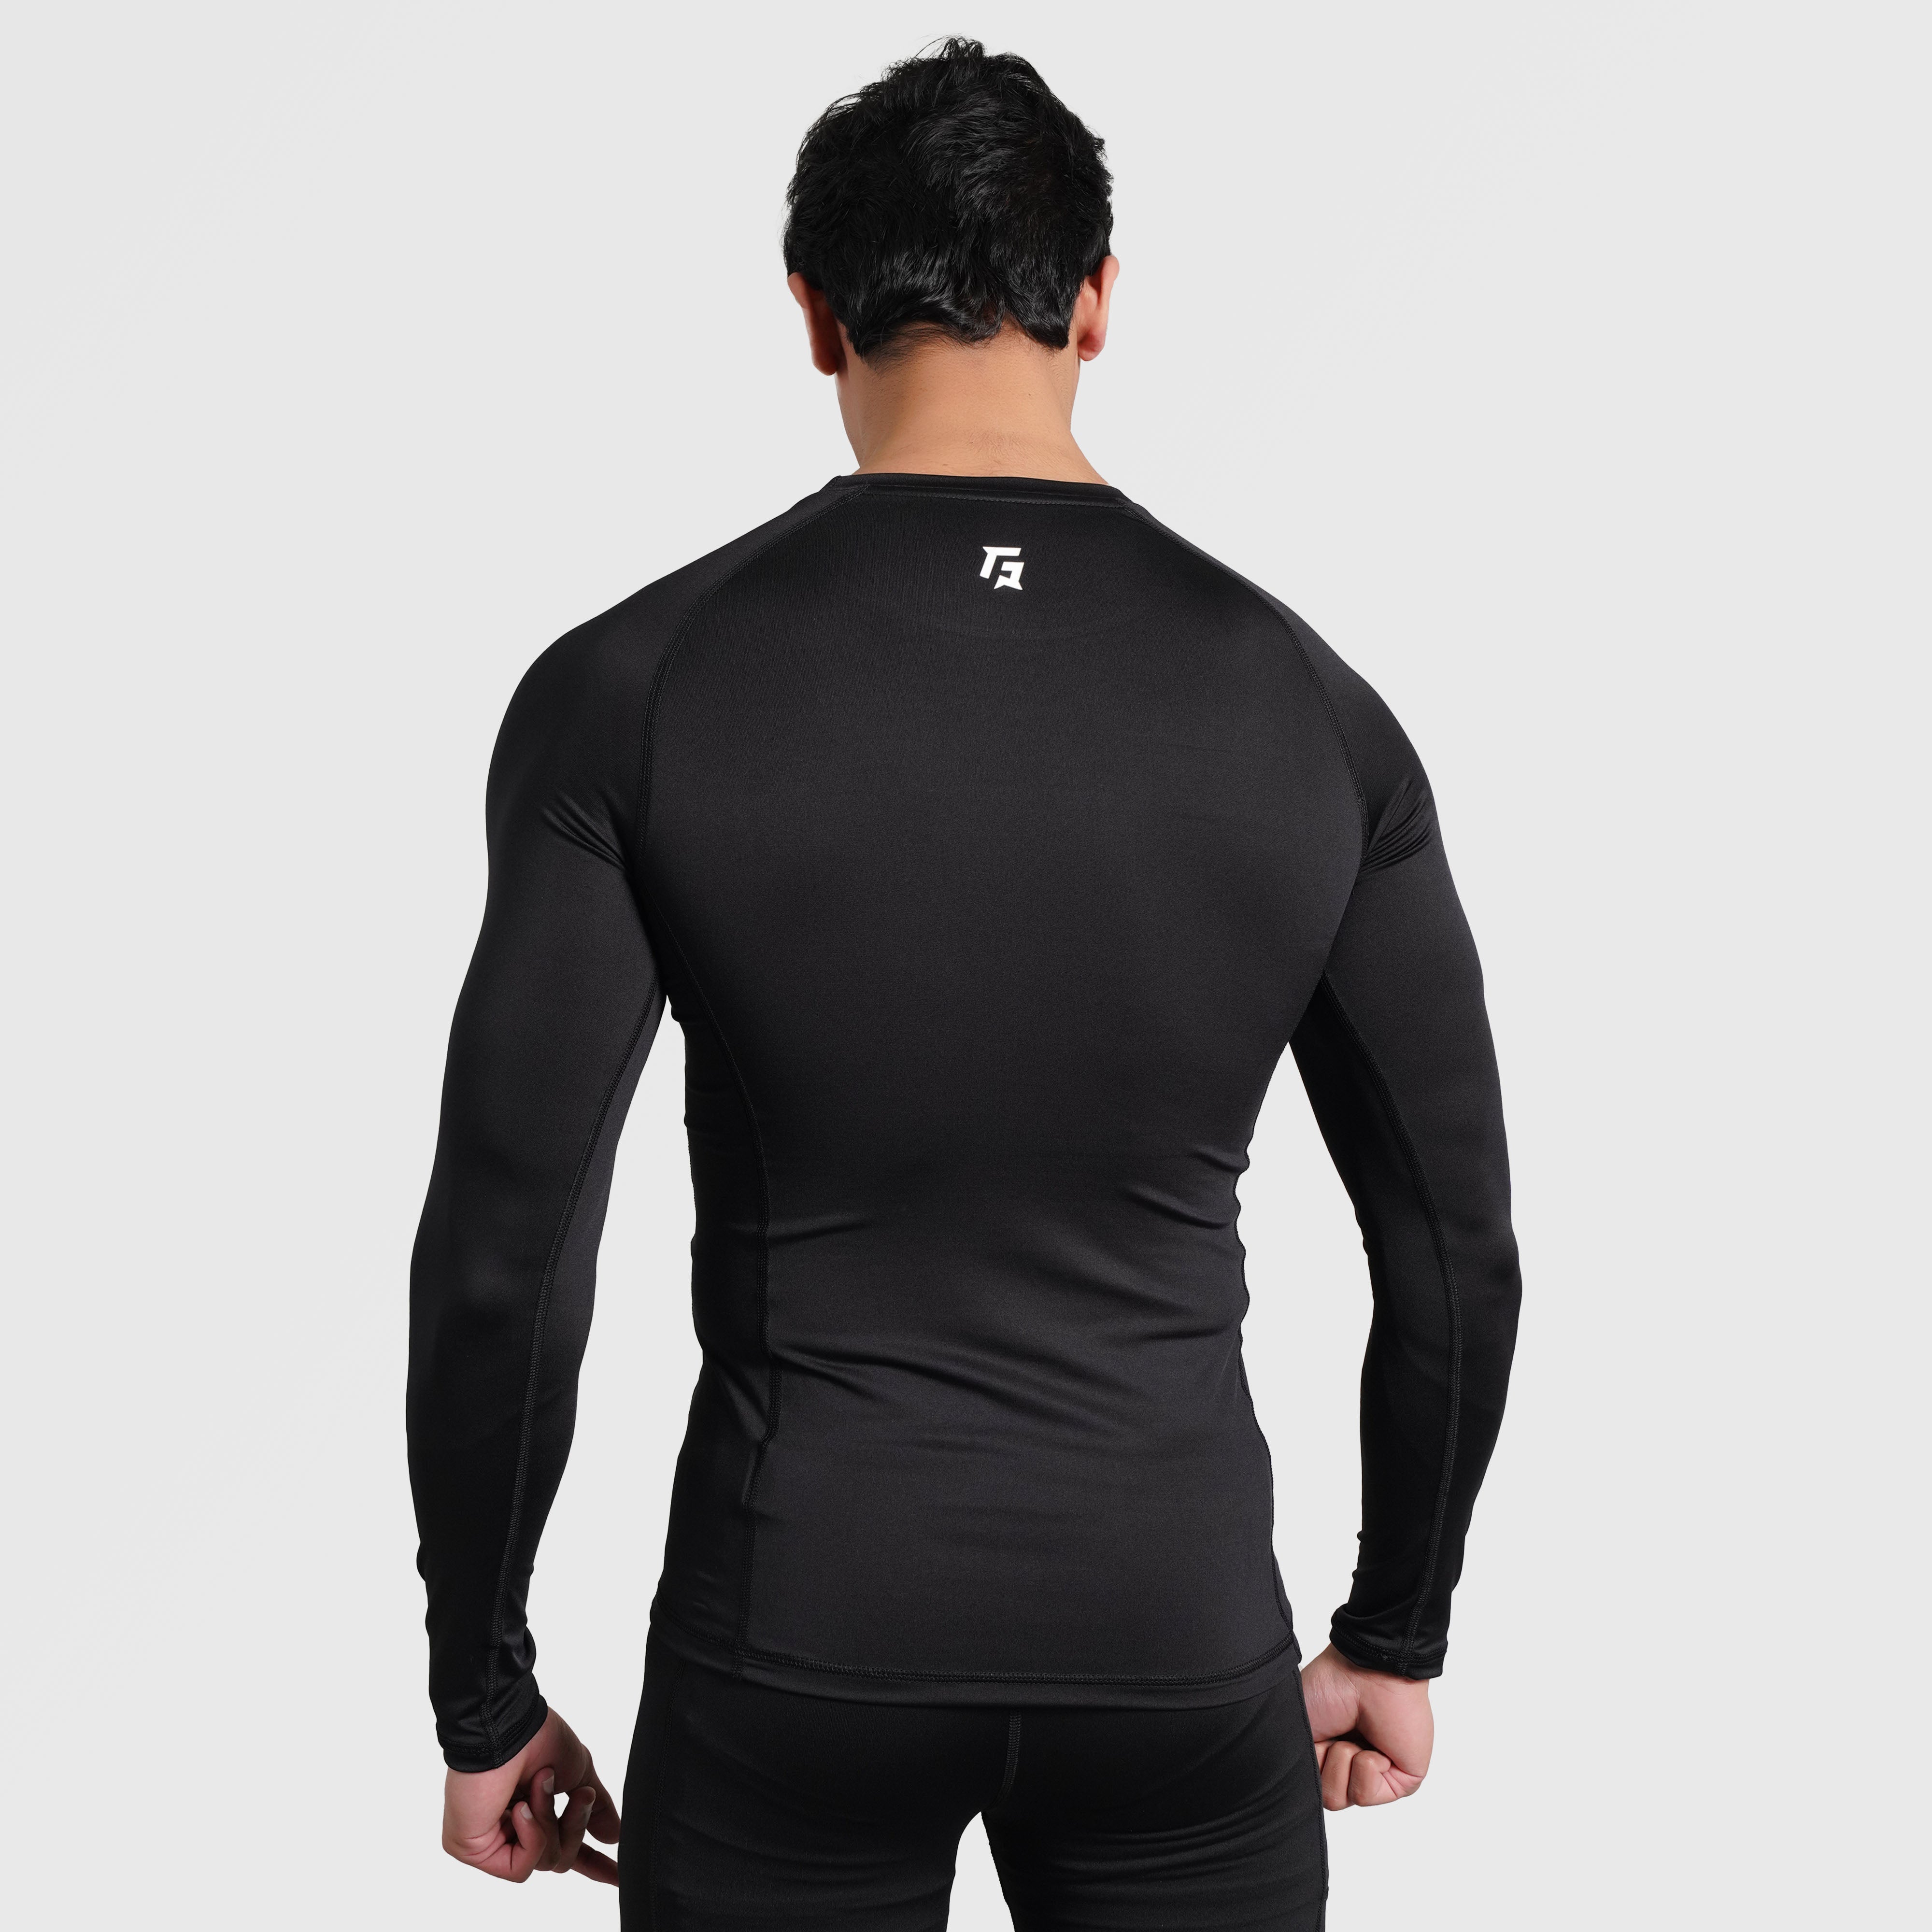 Armour Compression LongSleeves Tee (Black)